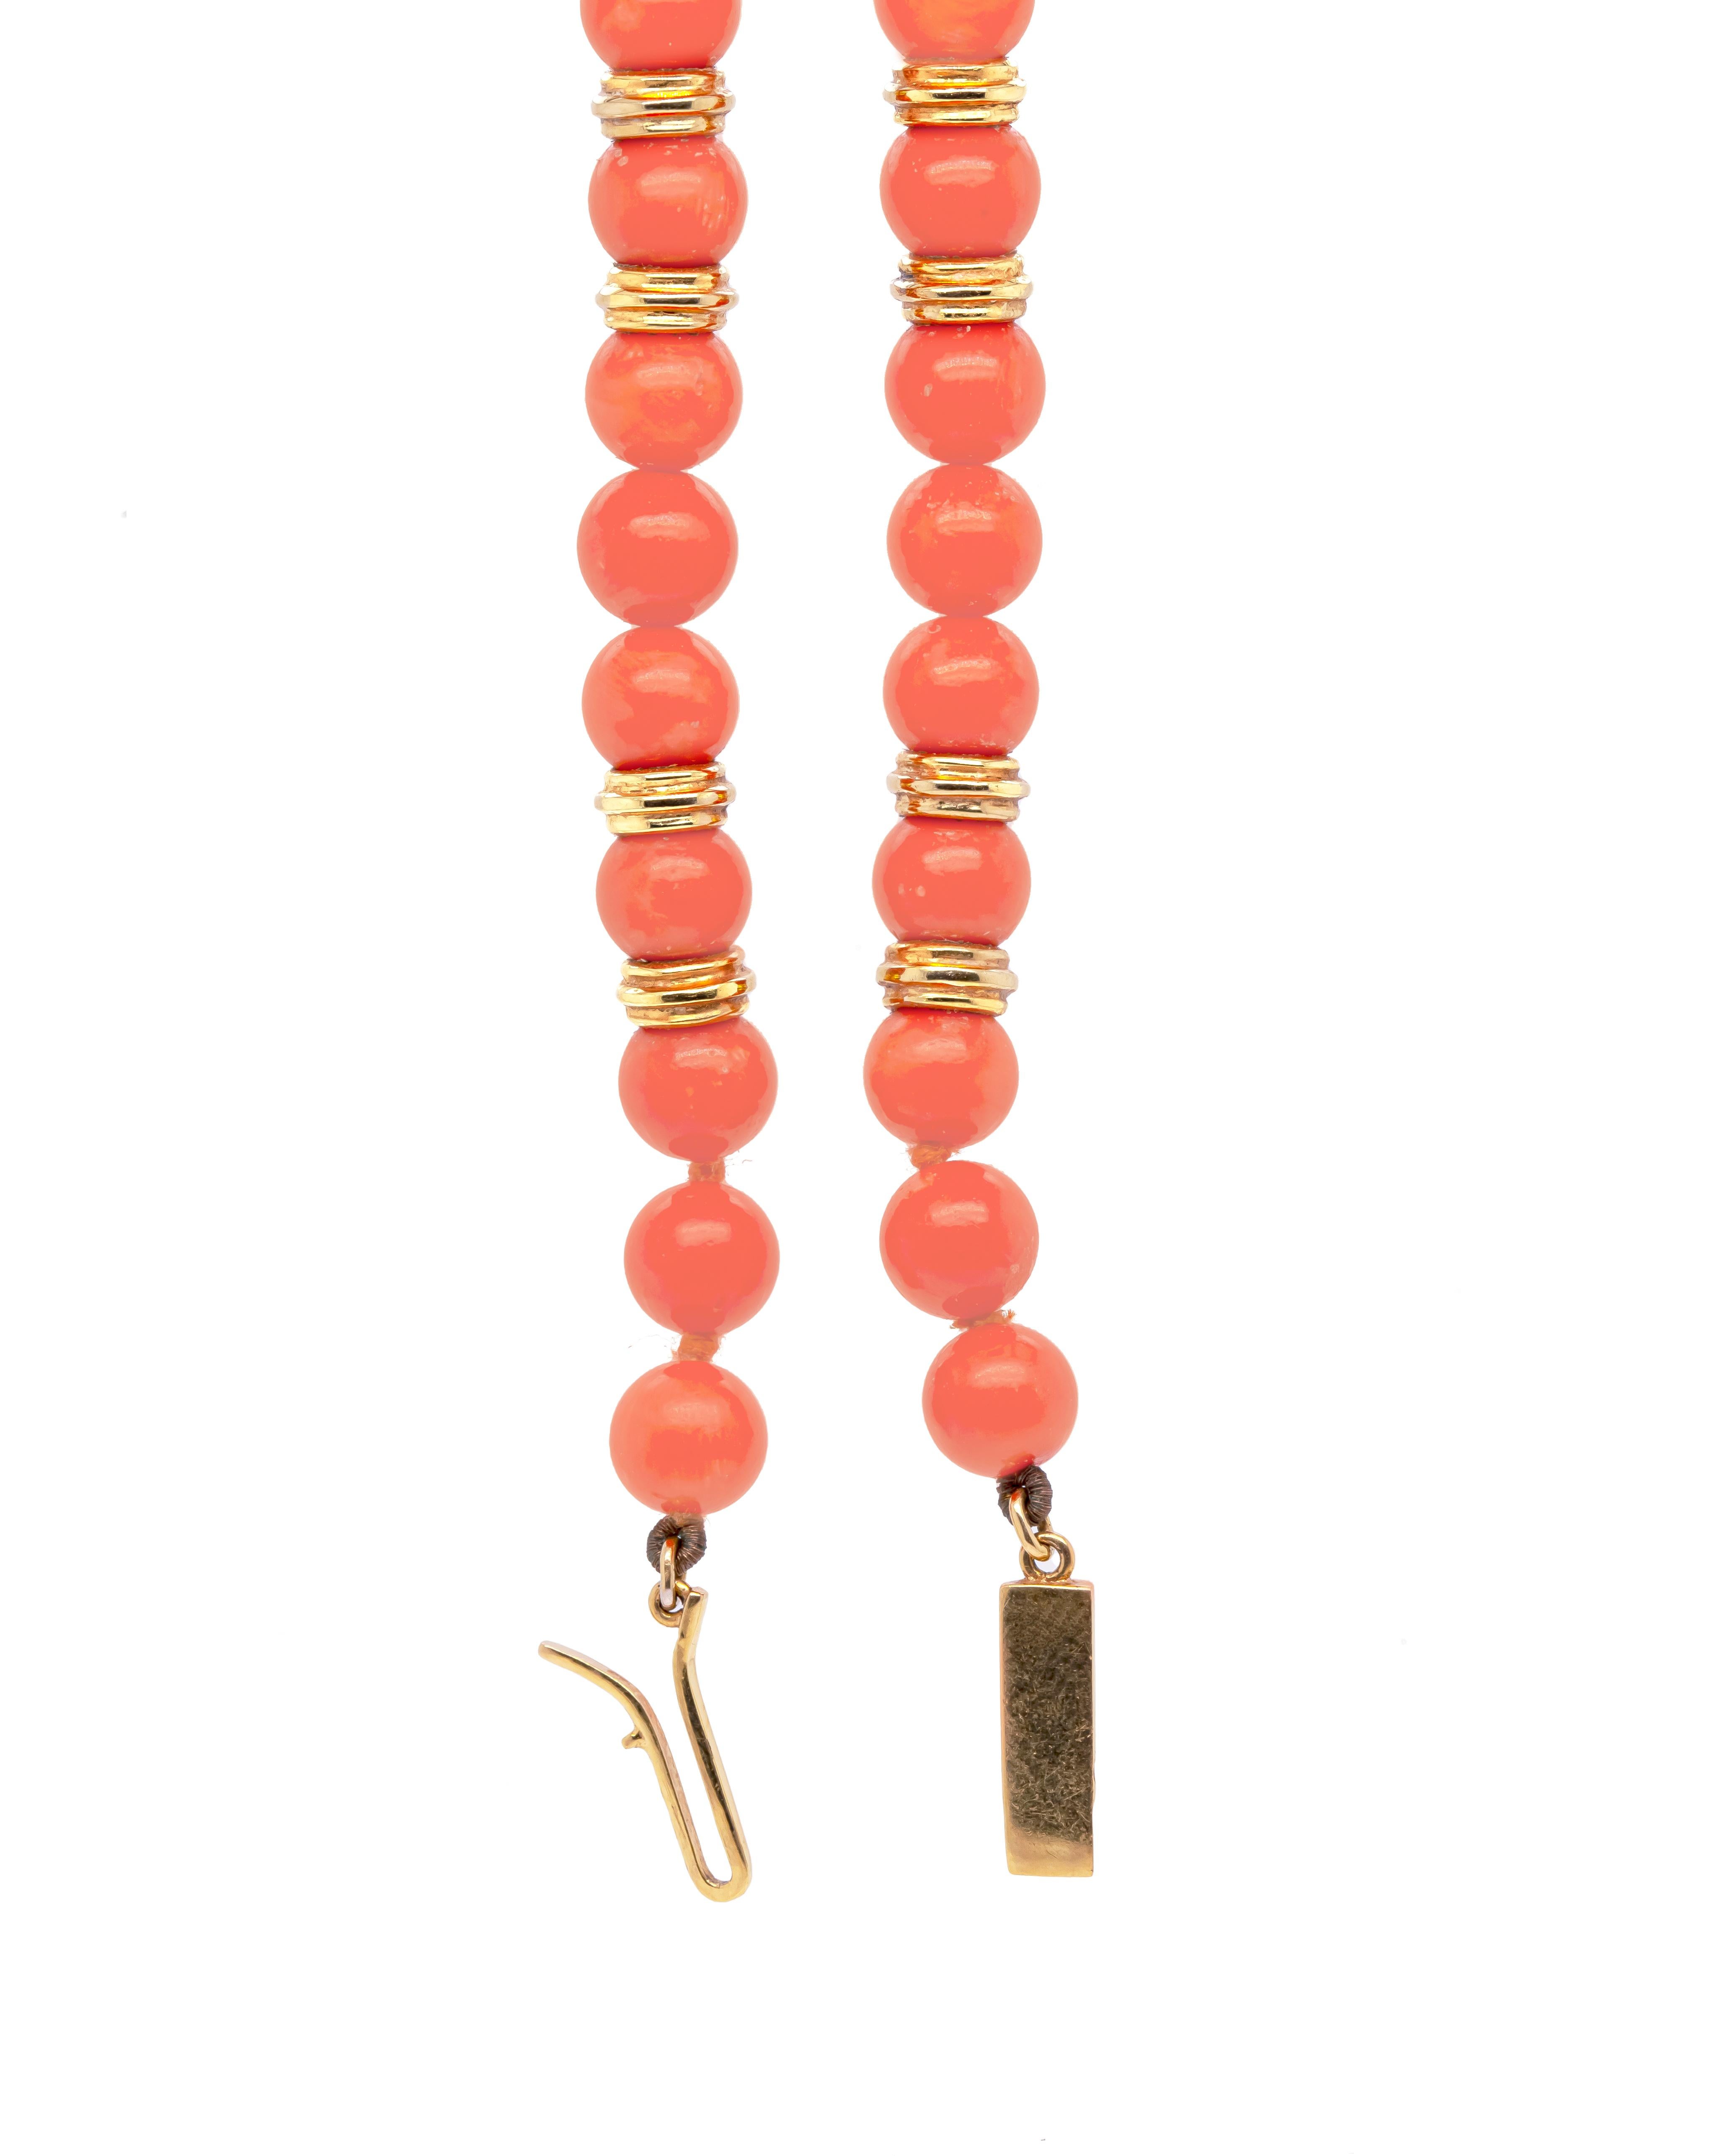 Meticulously crafted, this classic necklace showcases a single strand of polished coral beads measuring approximately 7.2mm in diameter. The sleek coral beads are highlighted by 18 carat yellow gold rondelle spacers beautifully spread throughout the